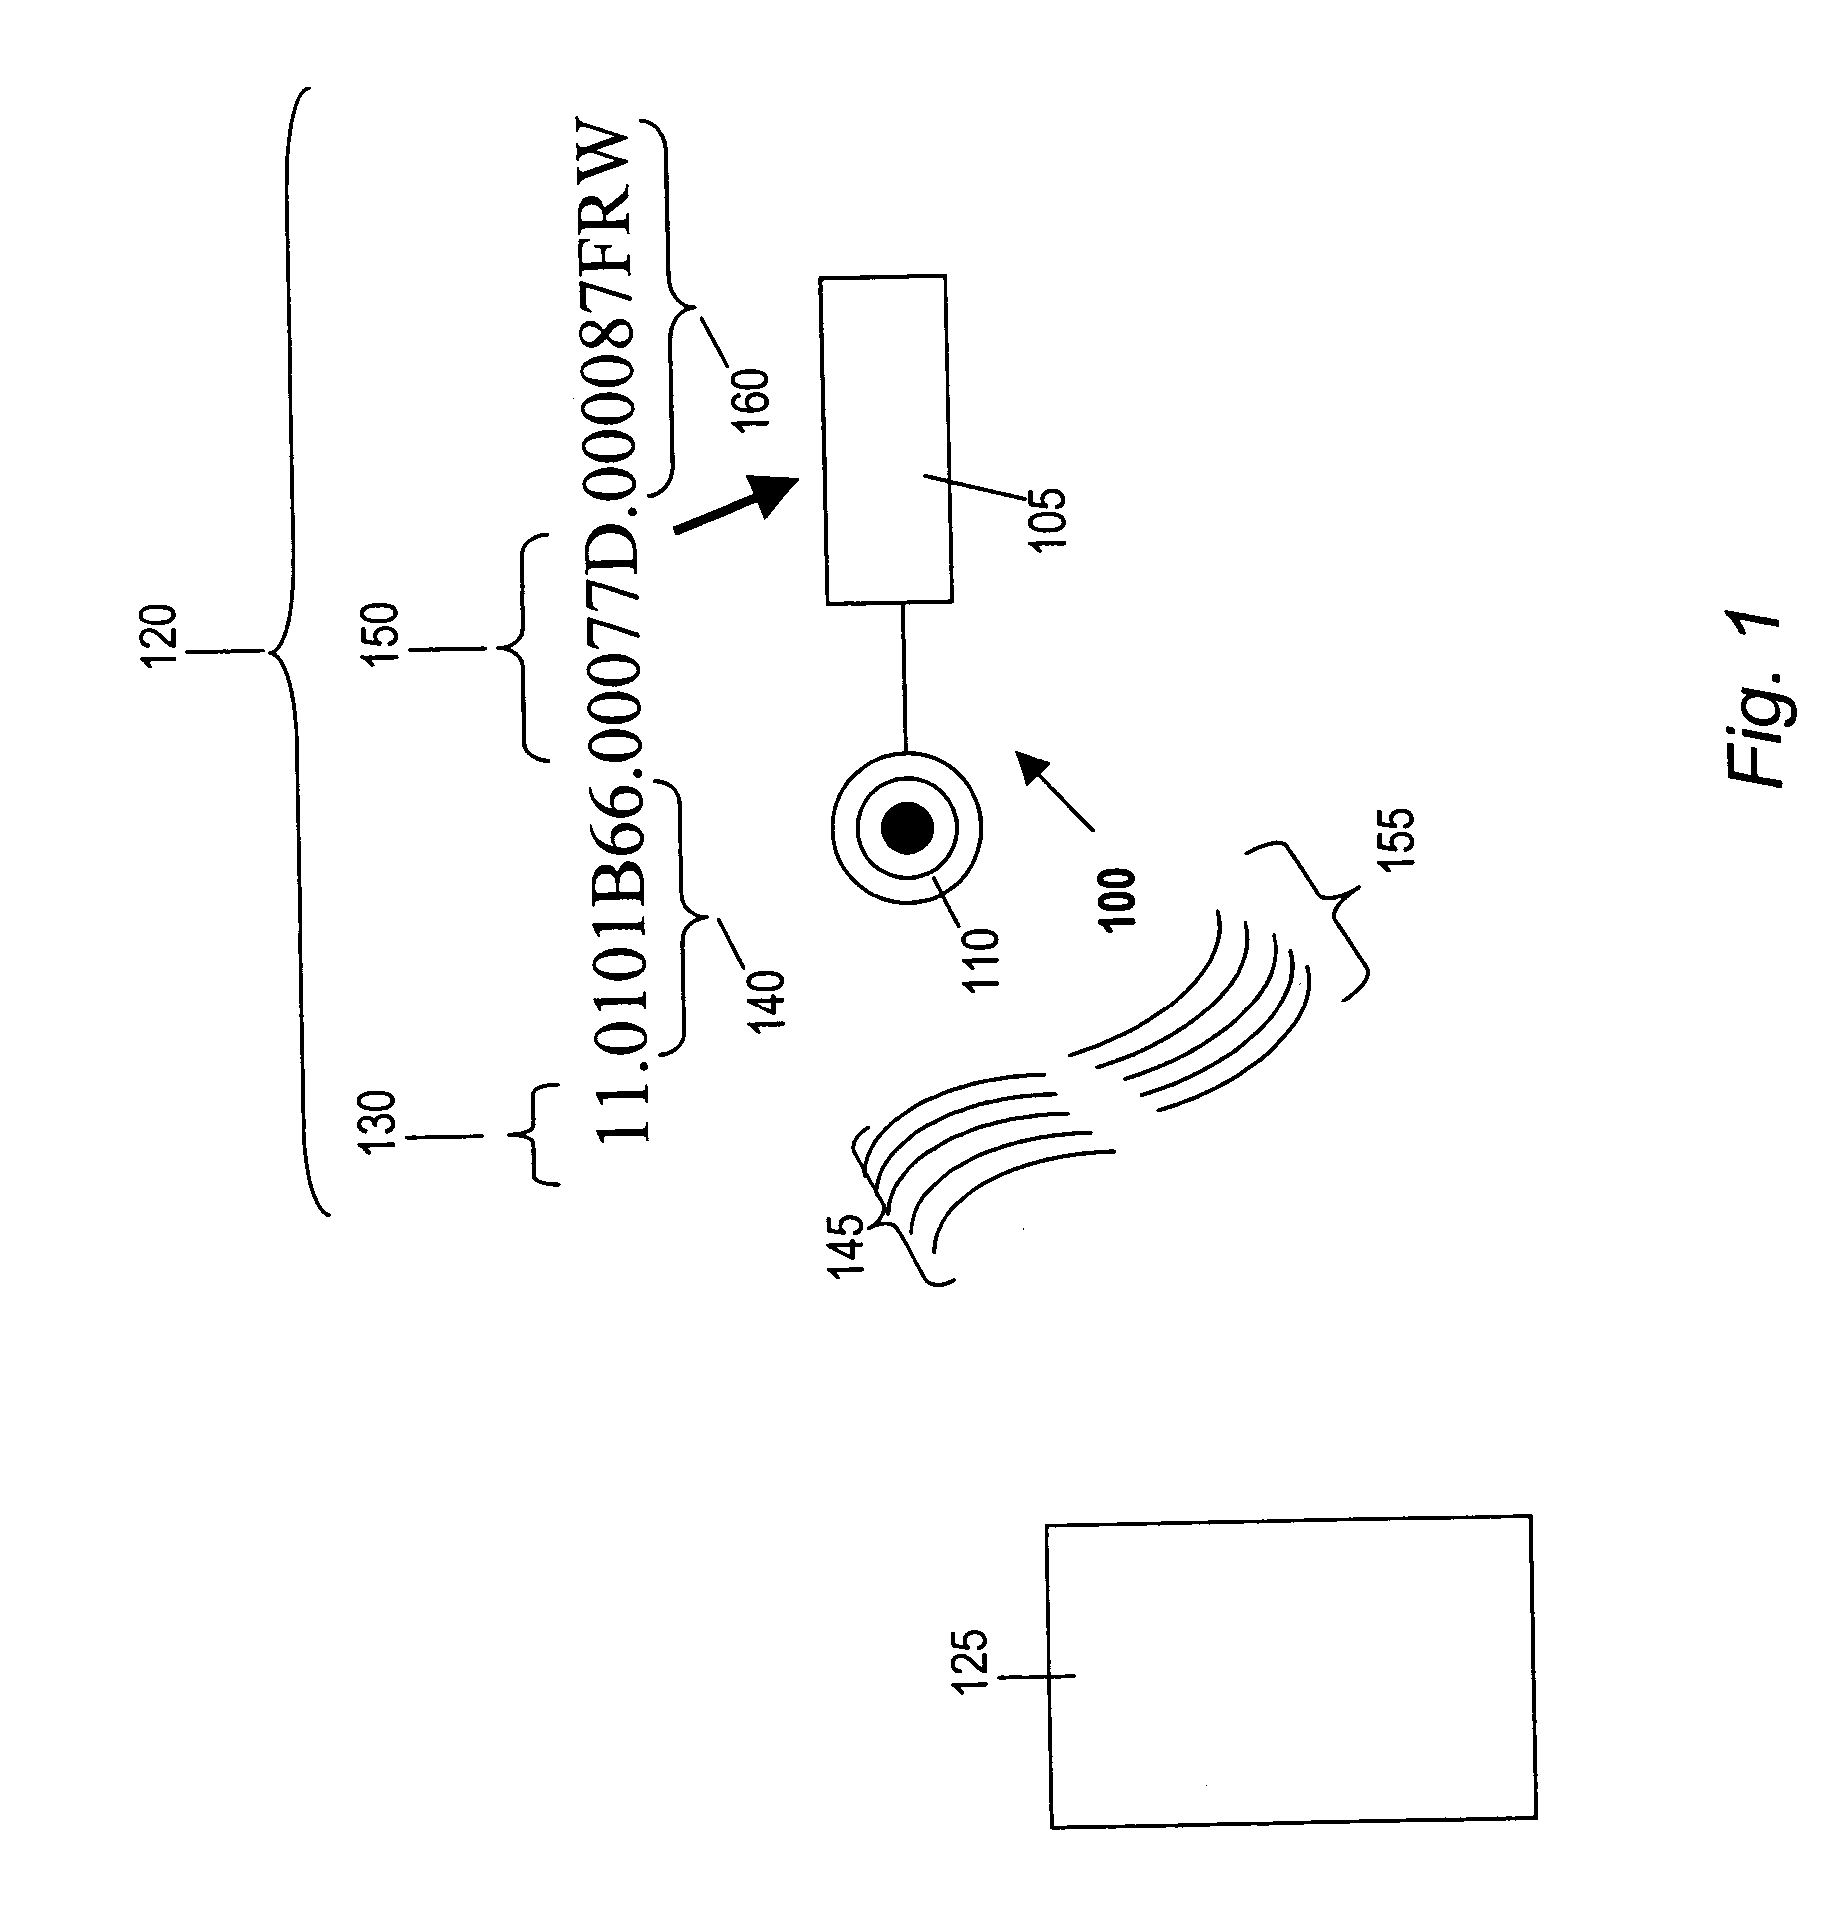 Methods and apparatus for determining the status of a device